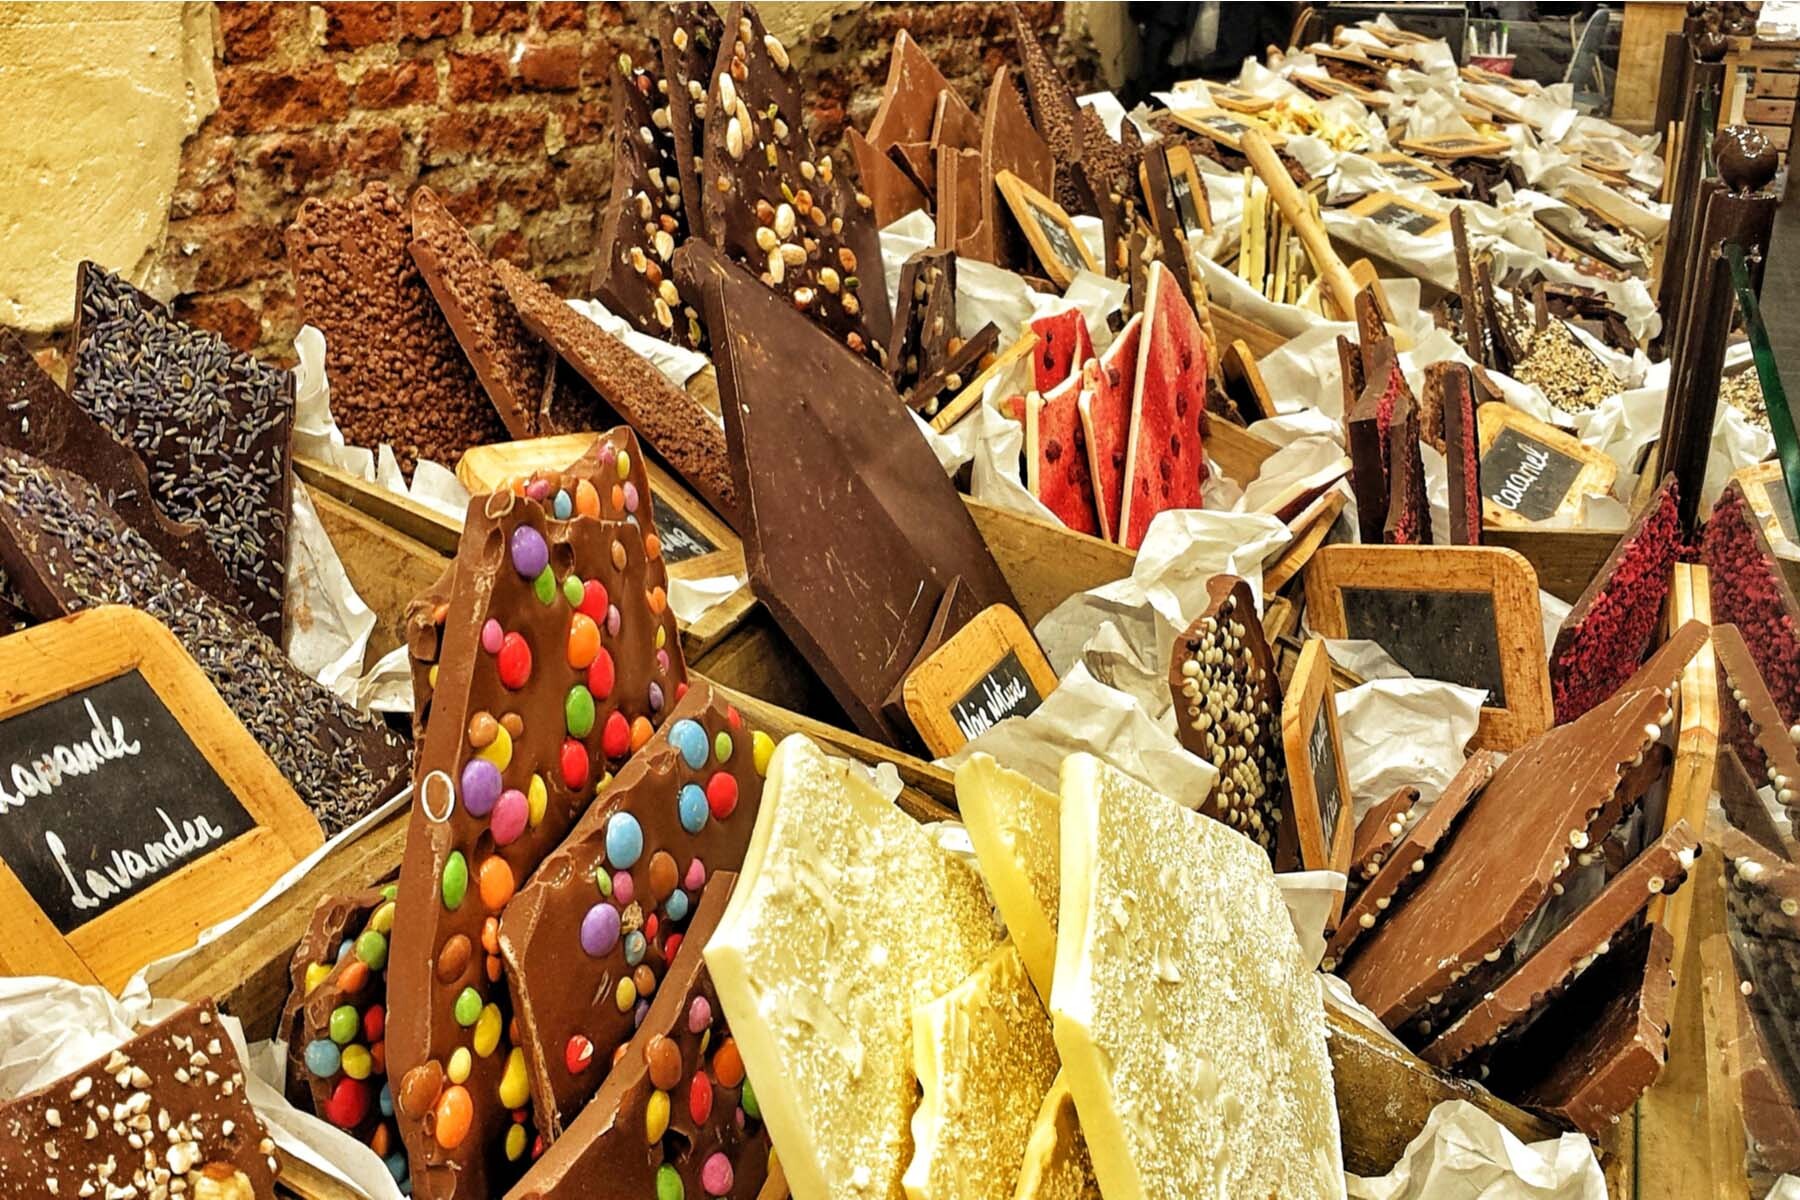 shopping guide to Belgium - Brussels chocolate shop